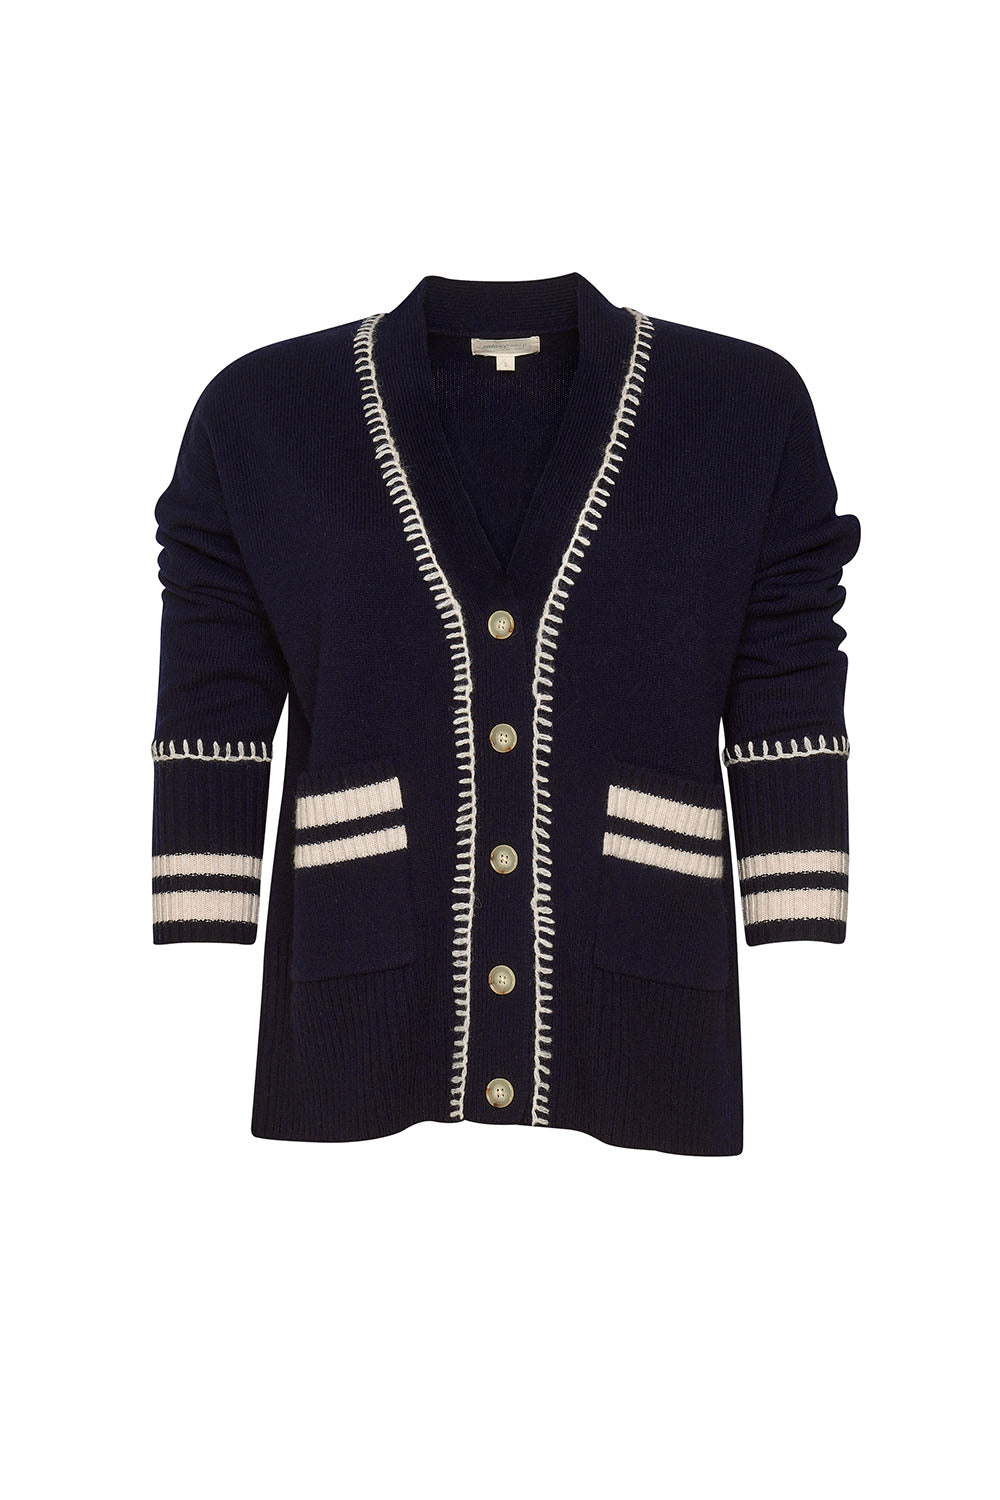 MADLY SWEETLY SADDLE ROW CARDI - NAVY - THE VOGUE STORE